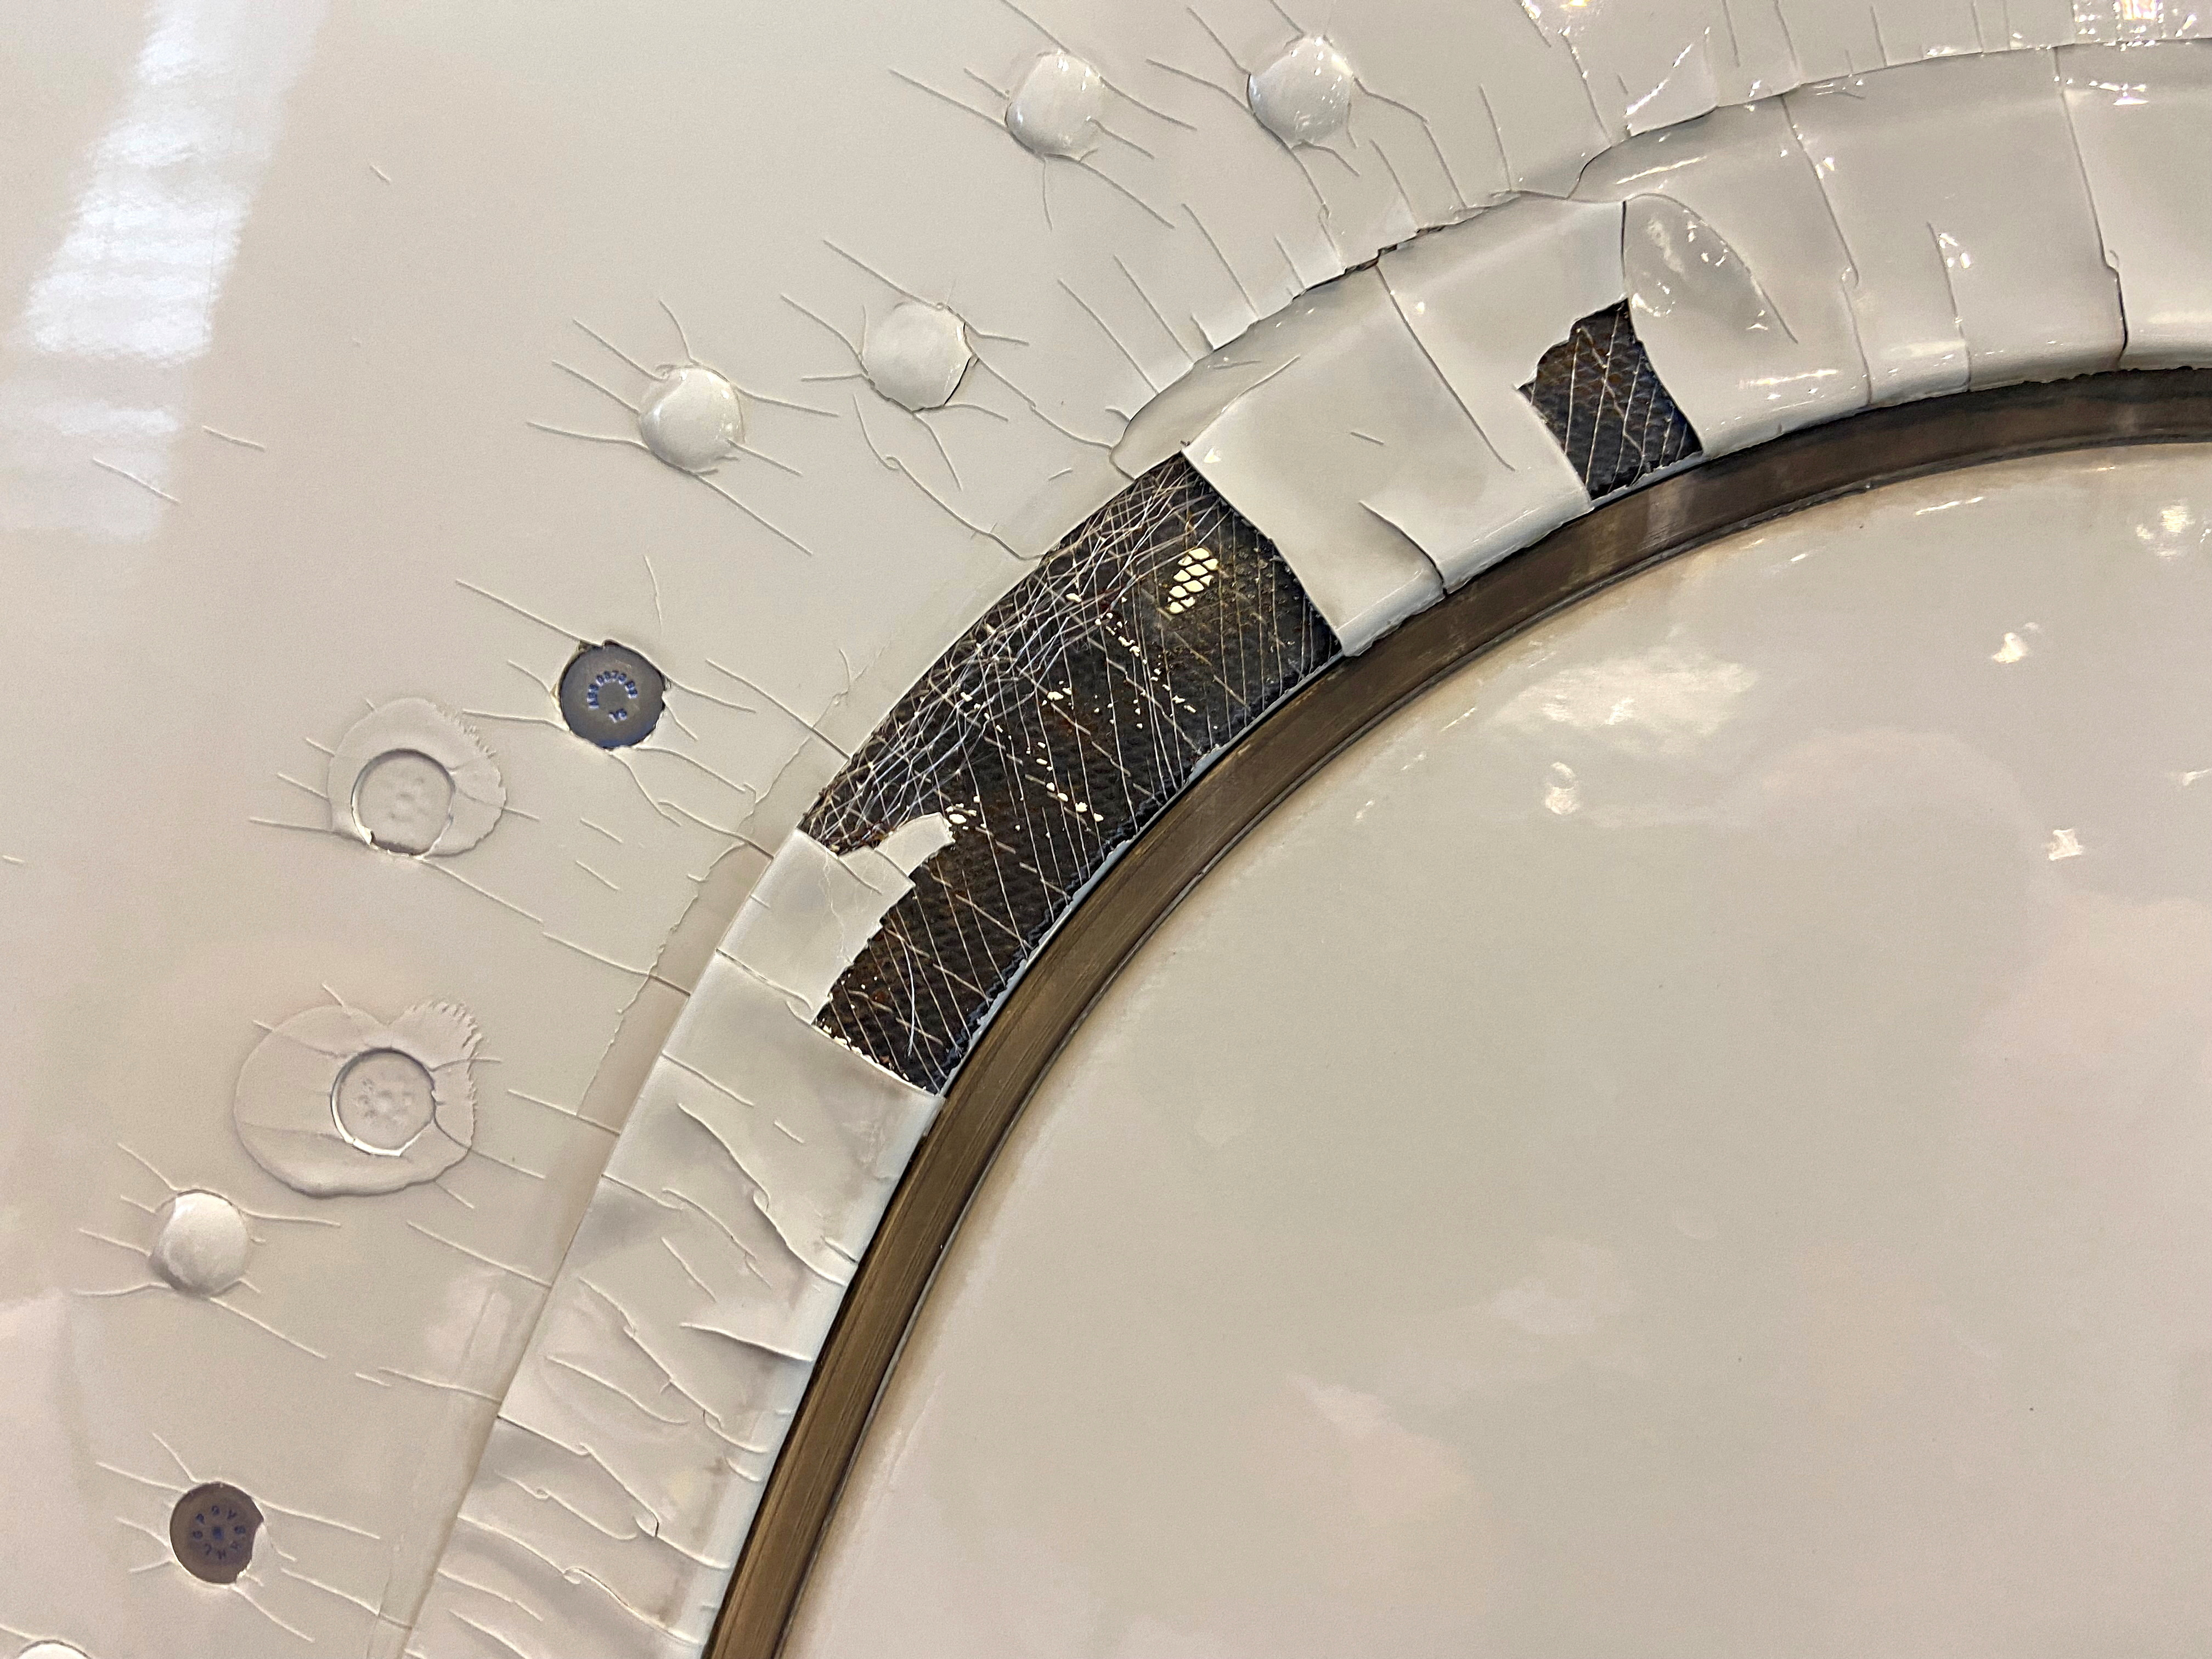 An undated image shows what appears to be paint peeling, cracking and exposed expanded copper foil (ECF) on the window of a Qatar Airways A350 aircraft